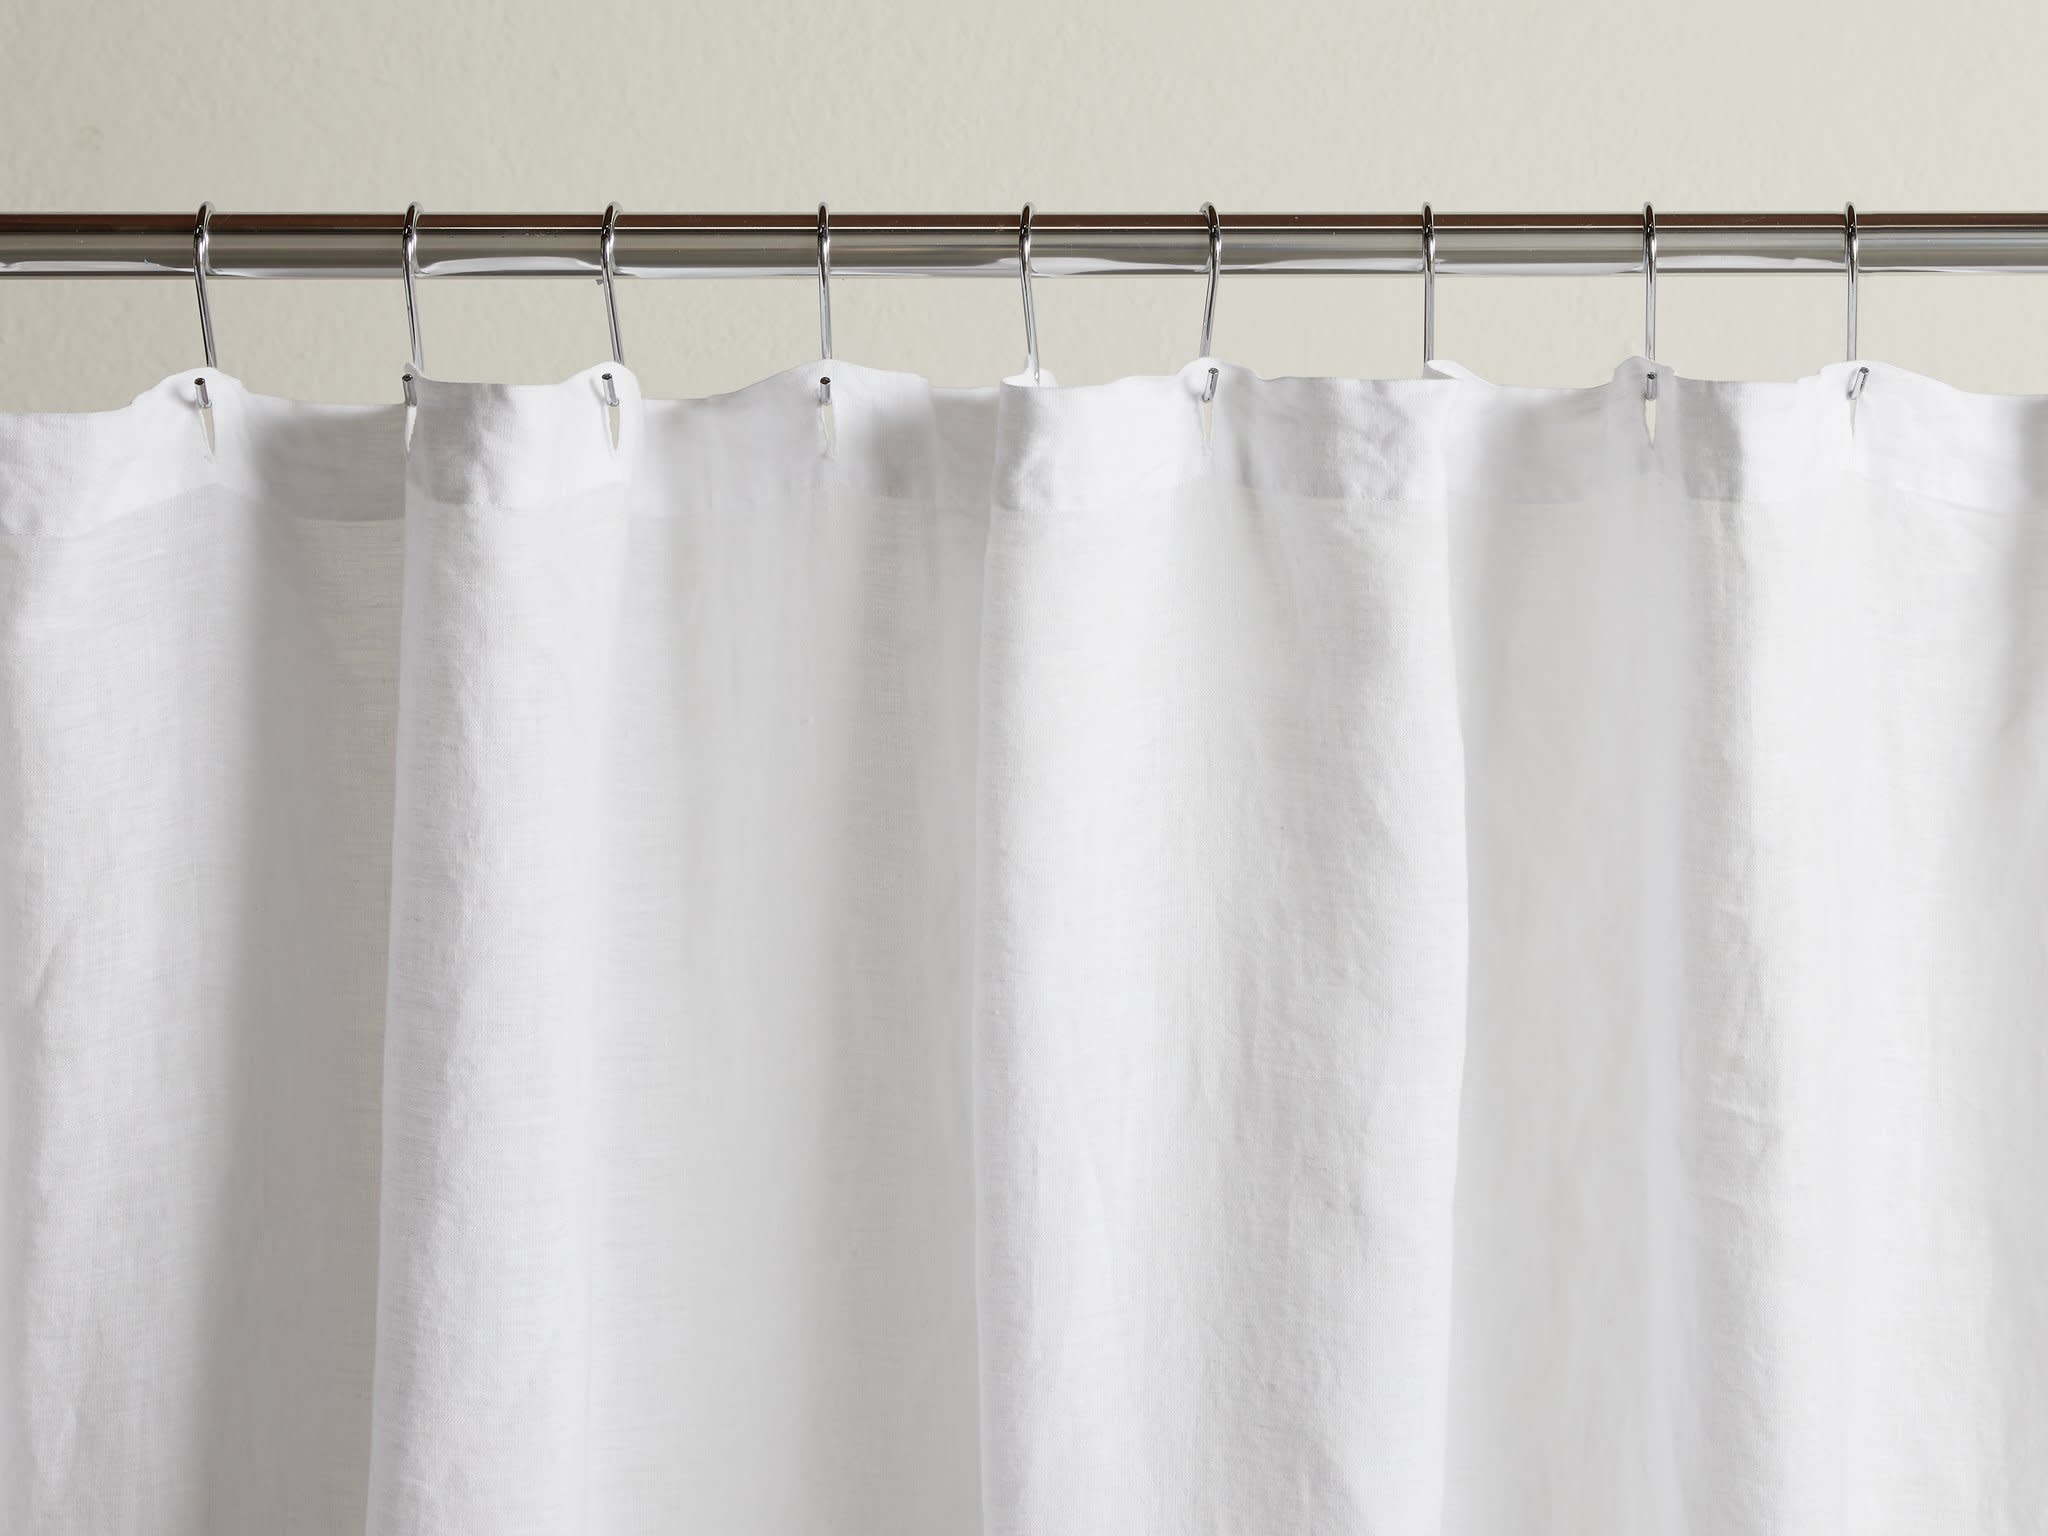 Linen Shower Curtain Shown In A Room